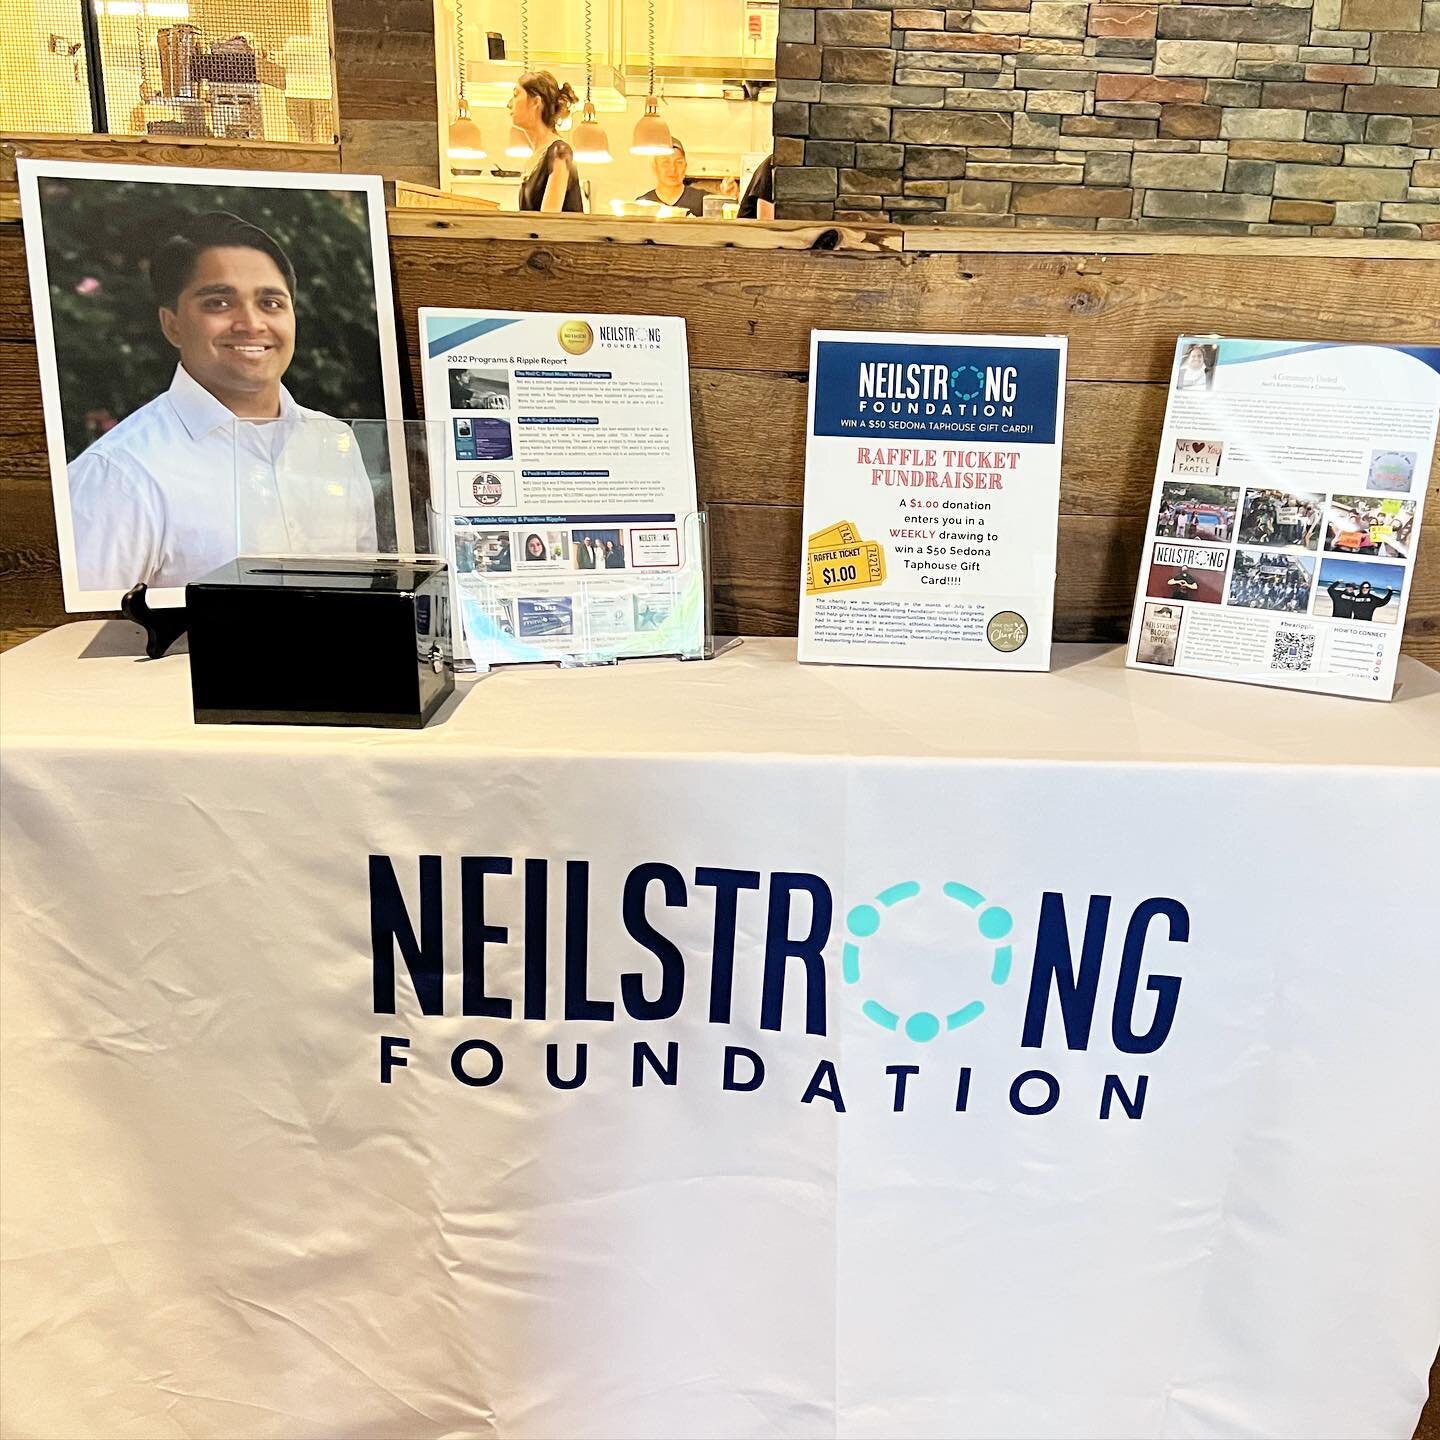 We are all set up for Mondays in July at Sedona Taphouse Phoenixville and West Chester locations!! Every Monday in July select entrees are half off and at least $1 per goes to NEILSTRONG Foundation!! There is also a raffle and for $1 a ticket you can